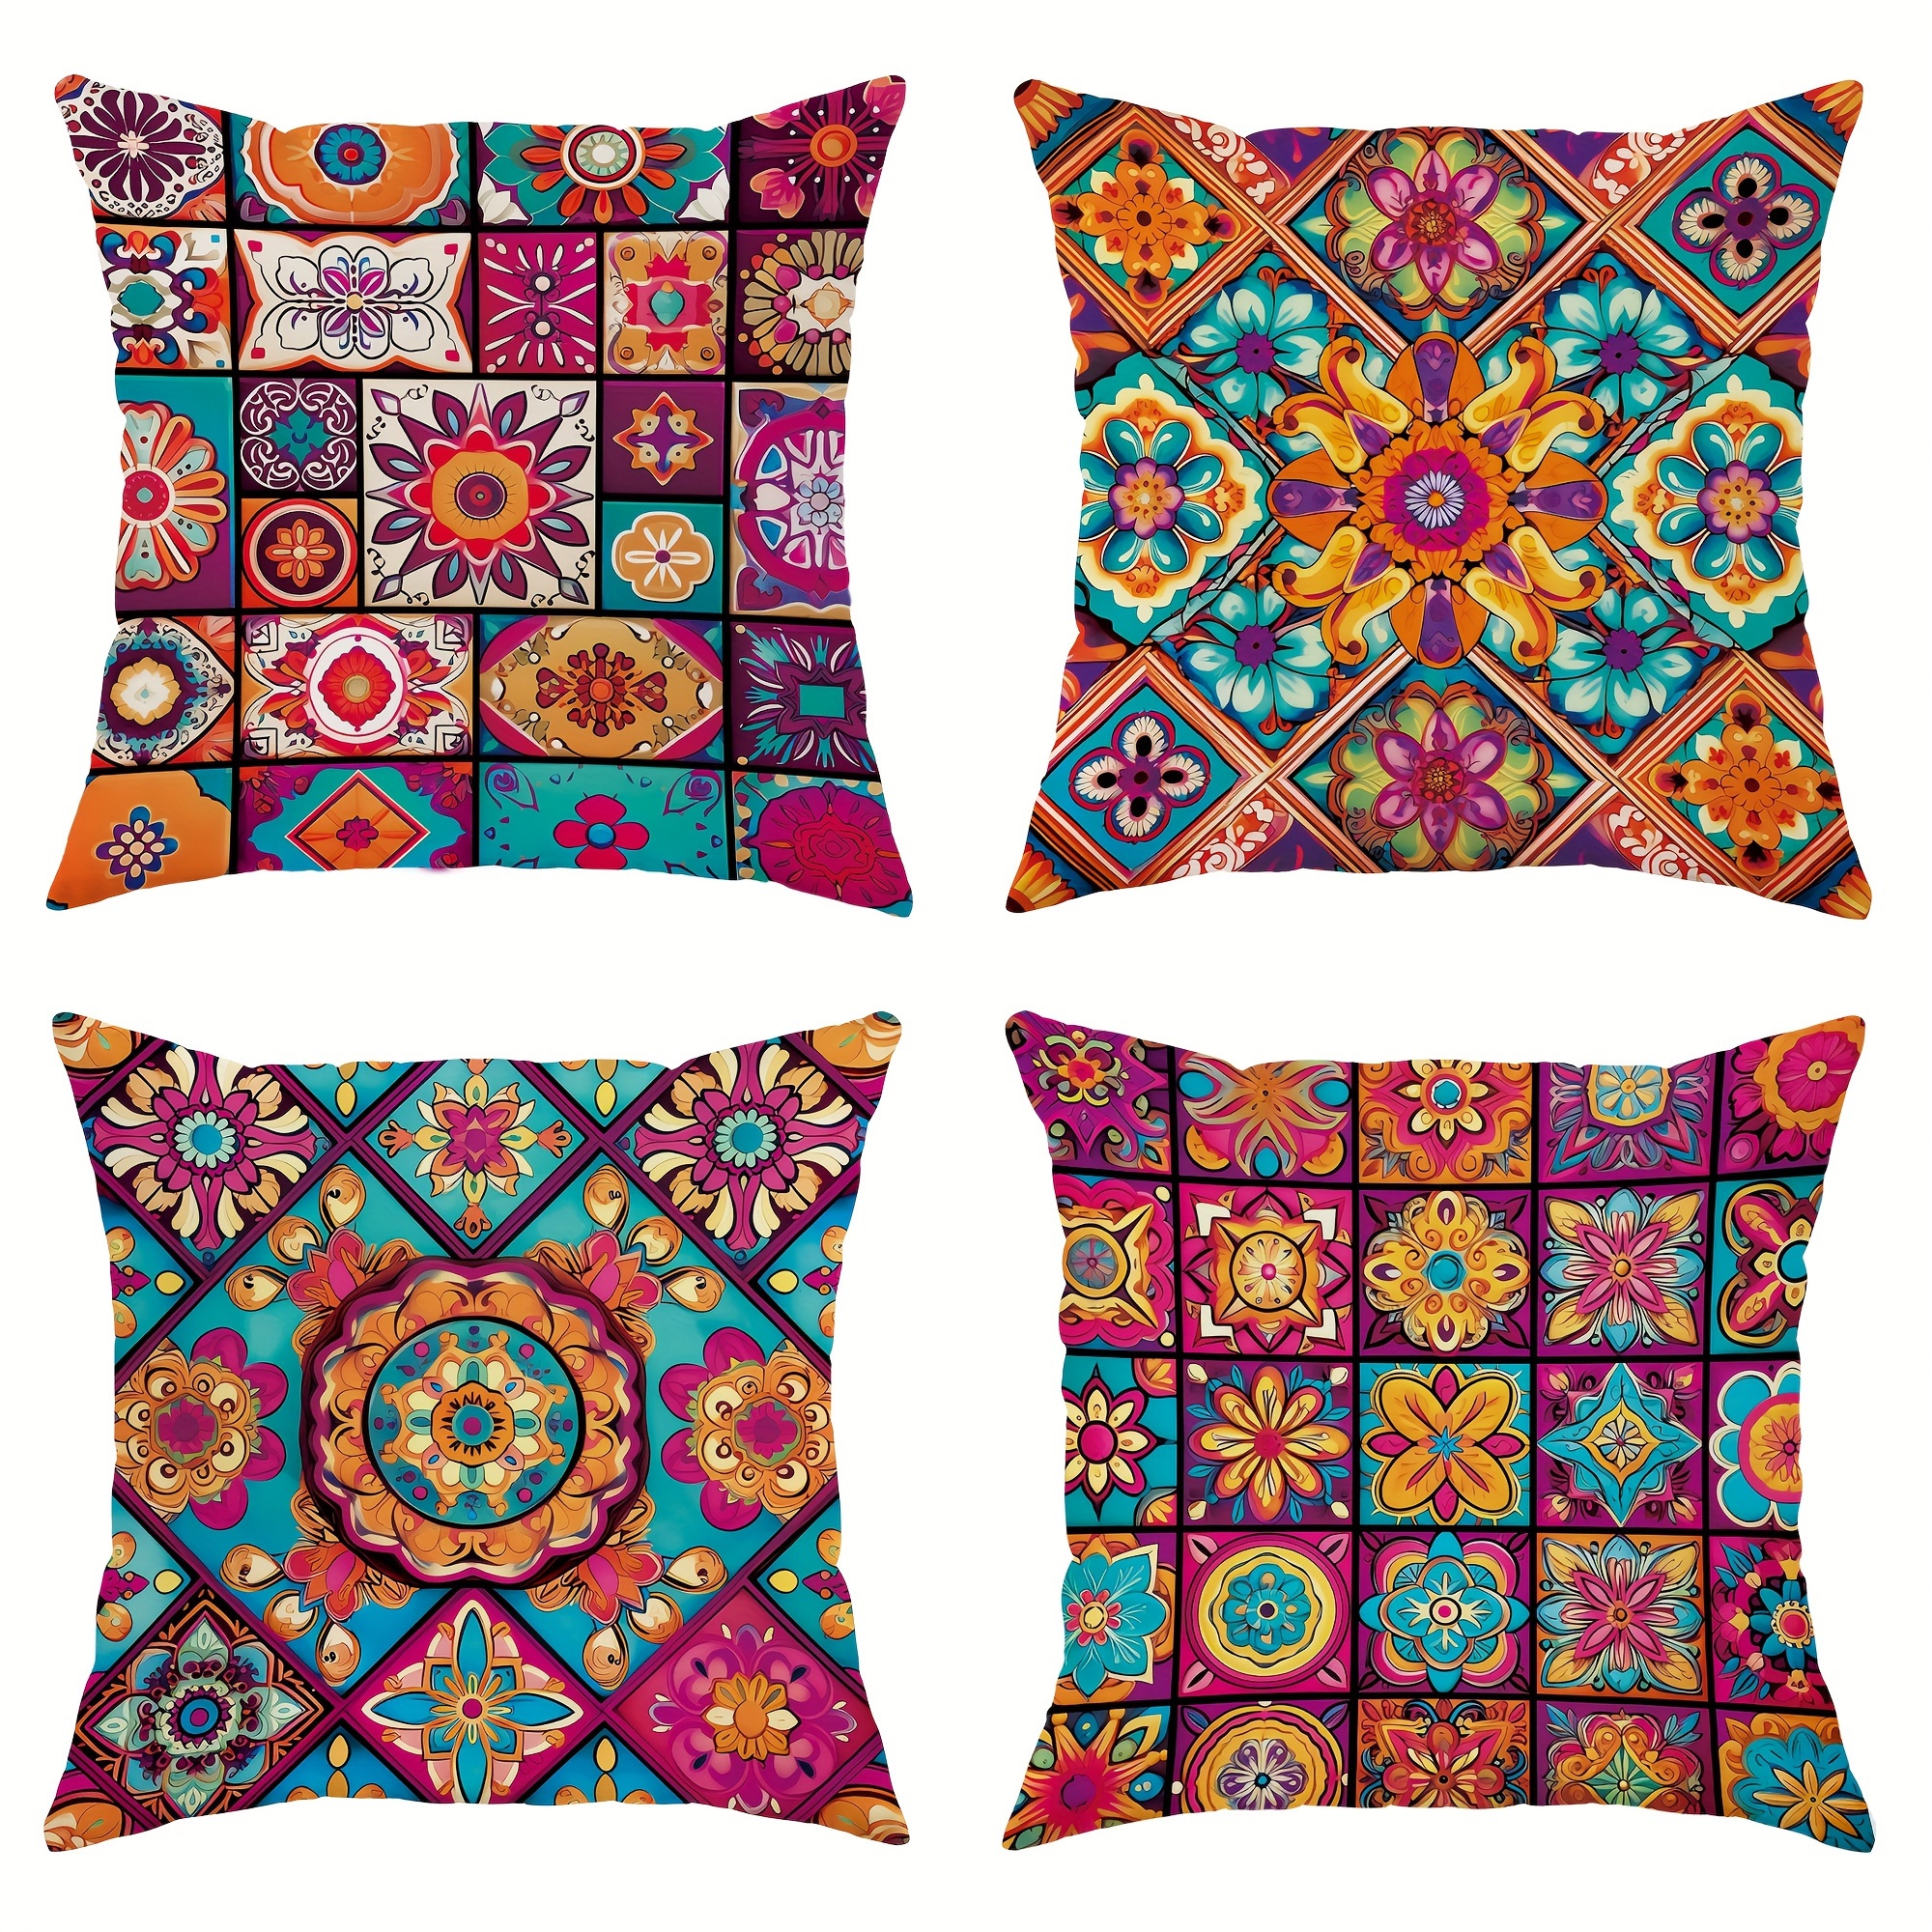 

4pcs, Mandala Flower Plaid Pink Orange Polyester Throw Pillow Covers, Bohemian Abstract Vintage Pillow Covers, Decorative Cushion Covers 45×45cm/18 "x18", For Living Room Bedroom Sofa Bed Decoration